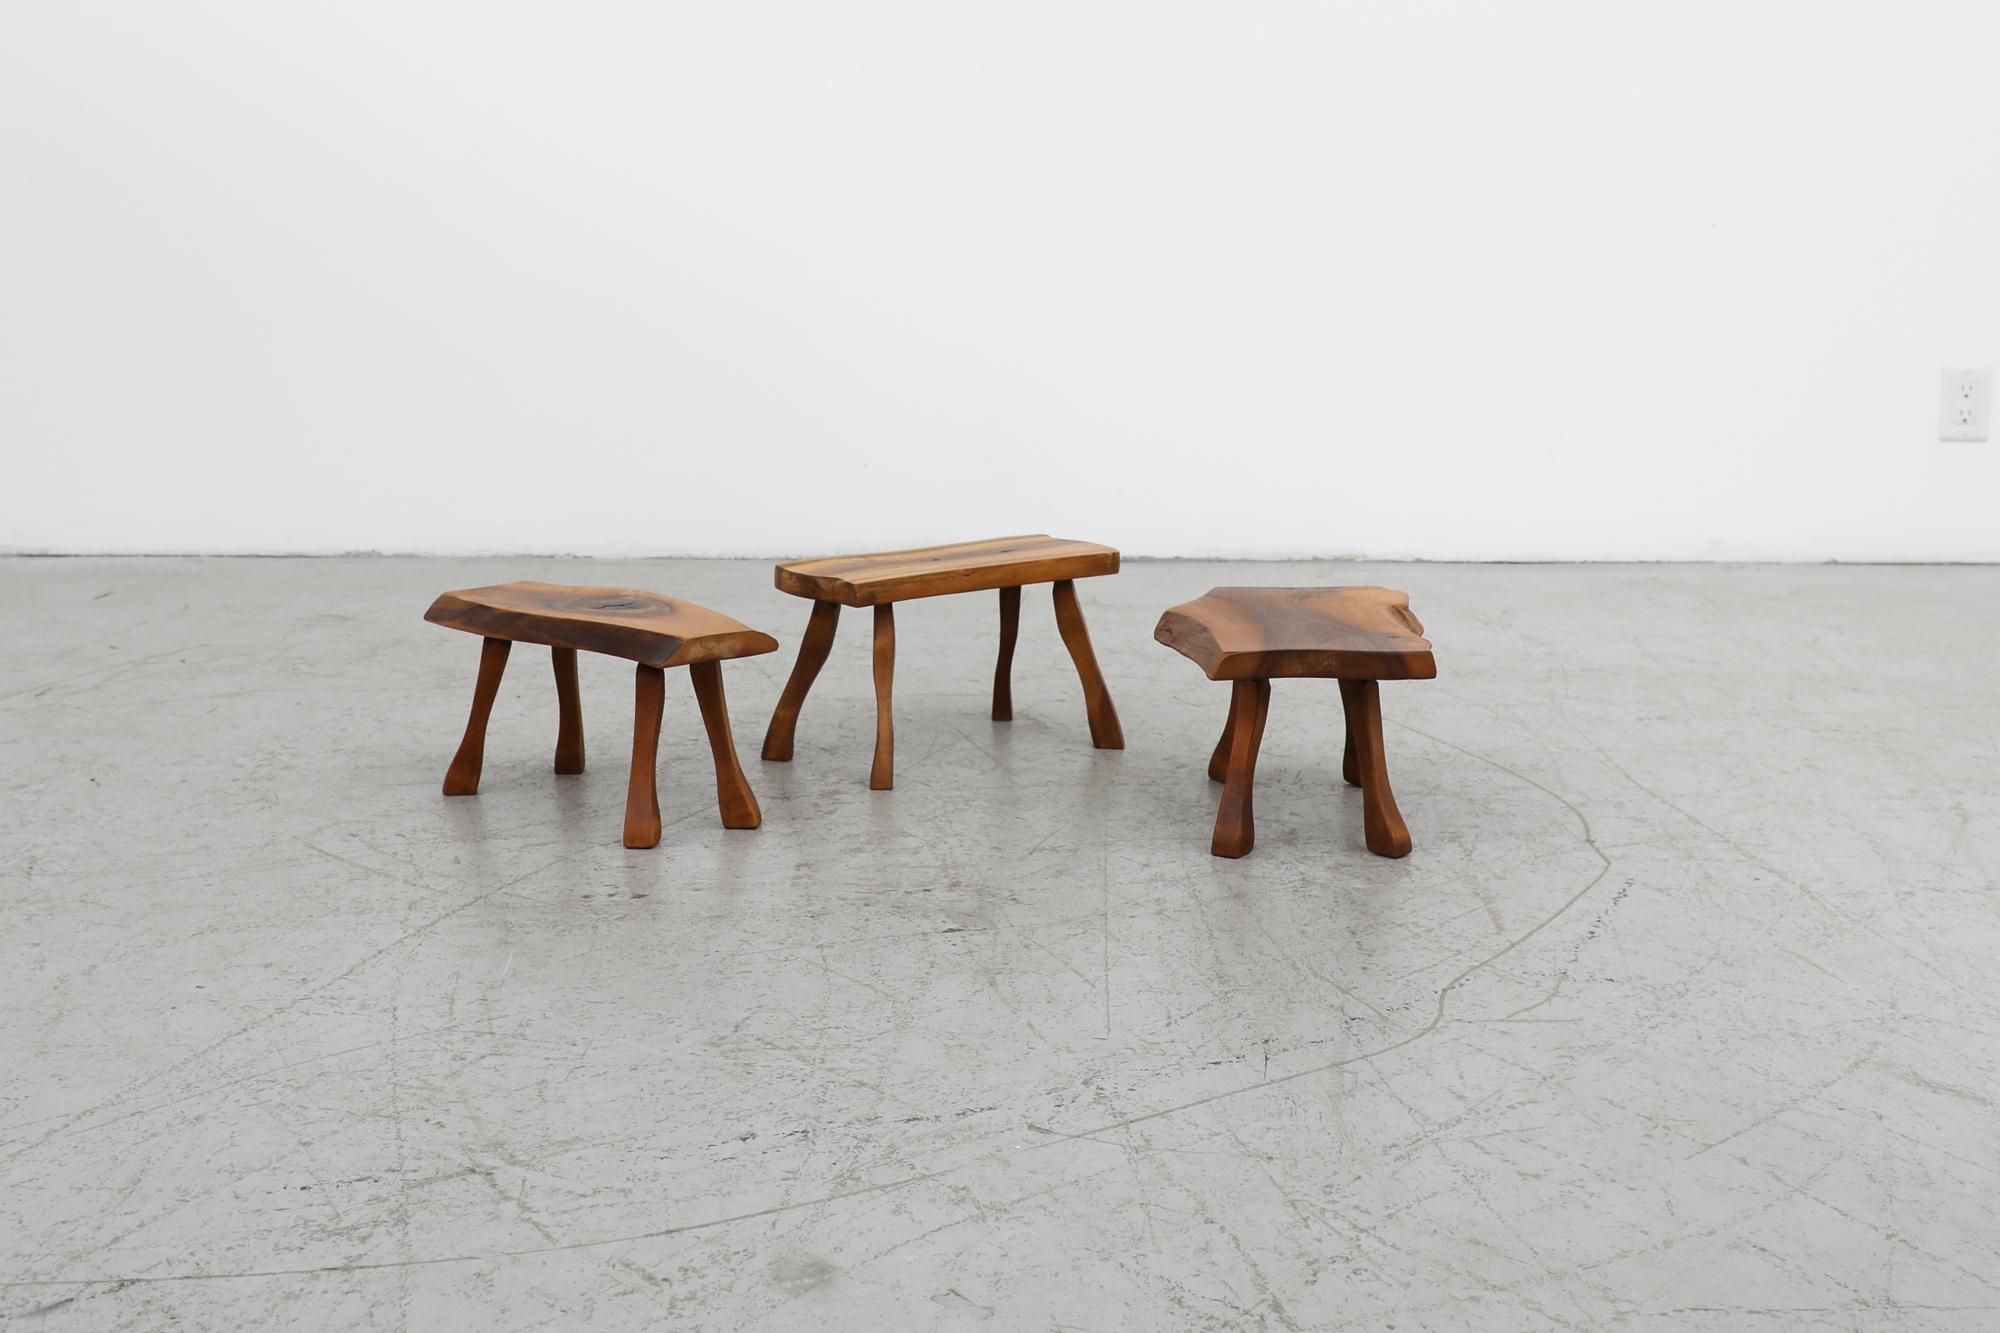 Gorgeous set of 3 George Nakashima style live edge stools or mini tables. Each piece has an original and unique live edge with beautifully carved legs that echo the natural curves of the live edge. In original condition with visible wear consistent